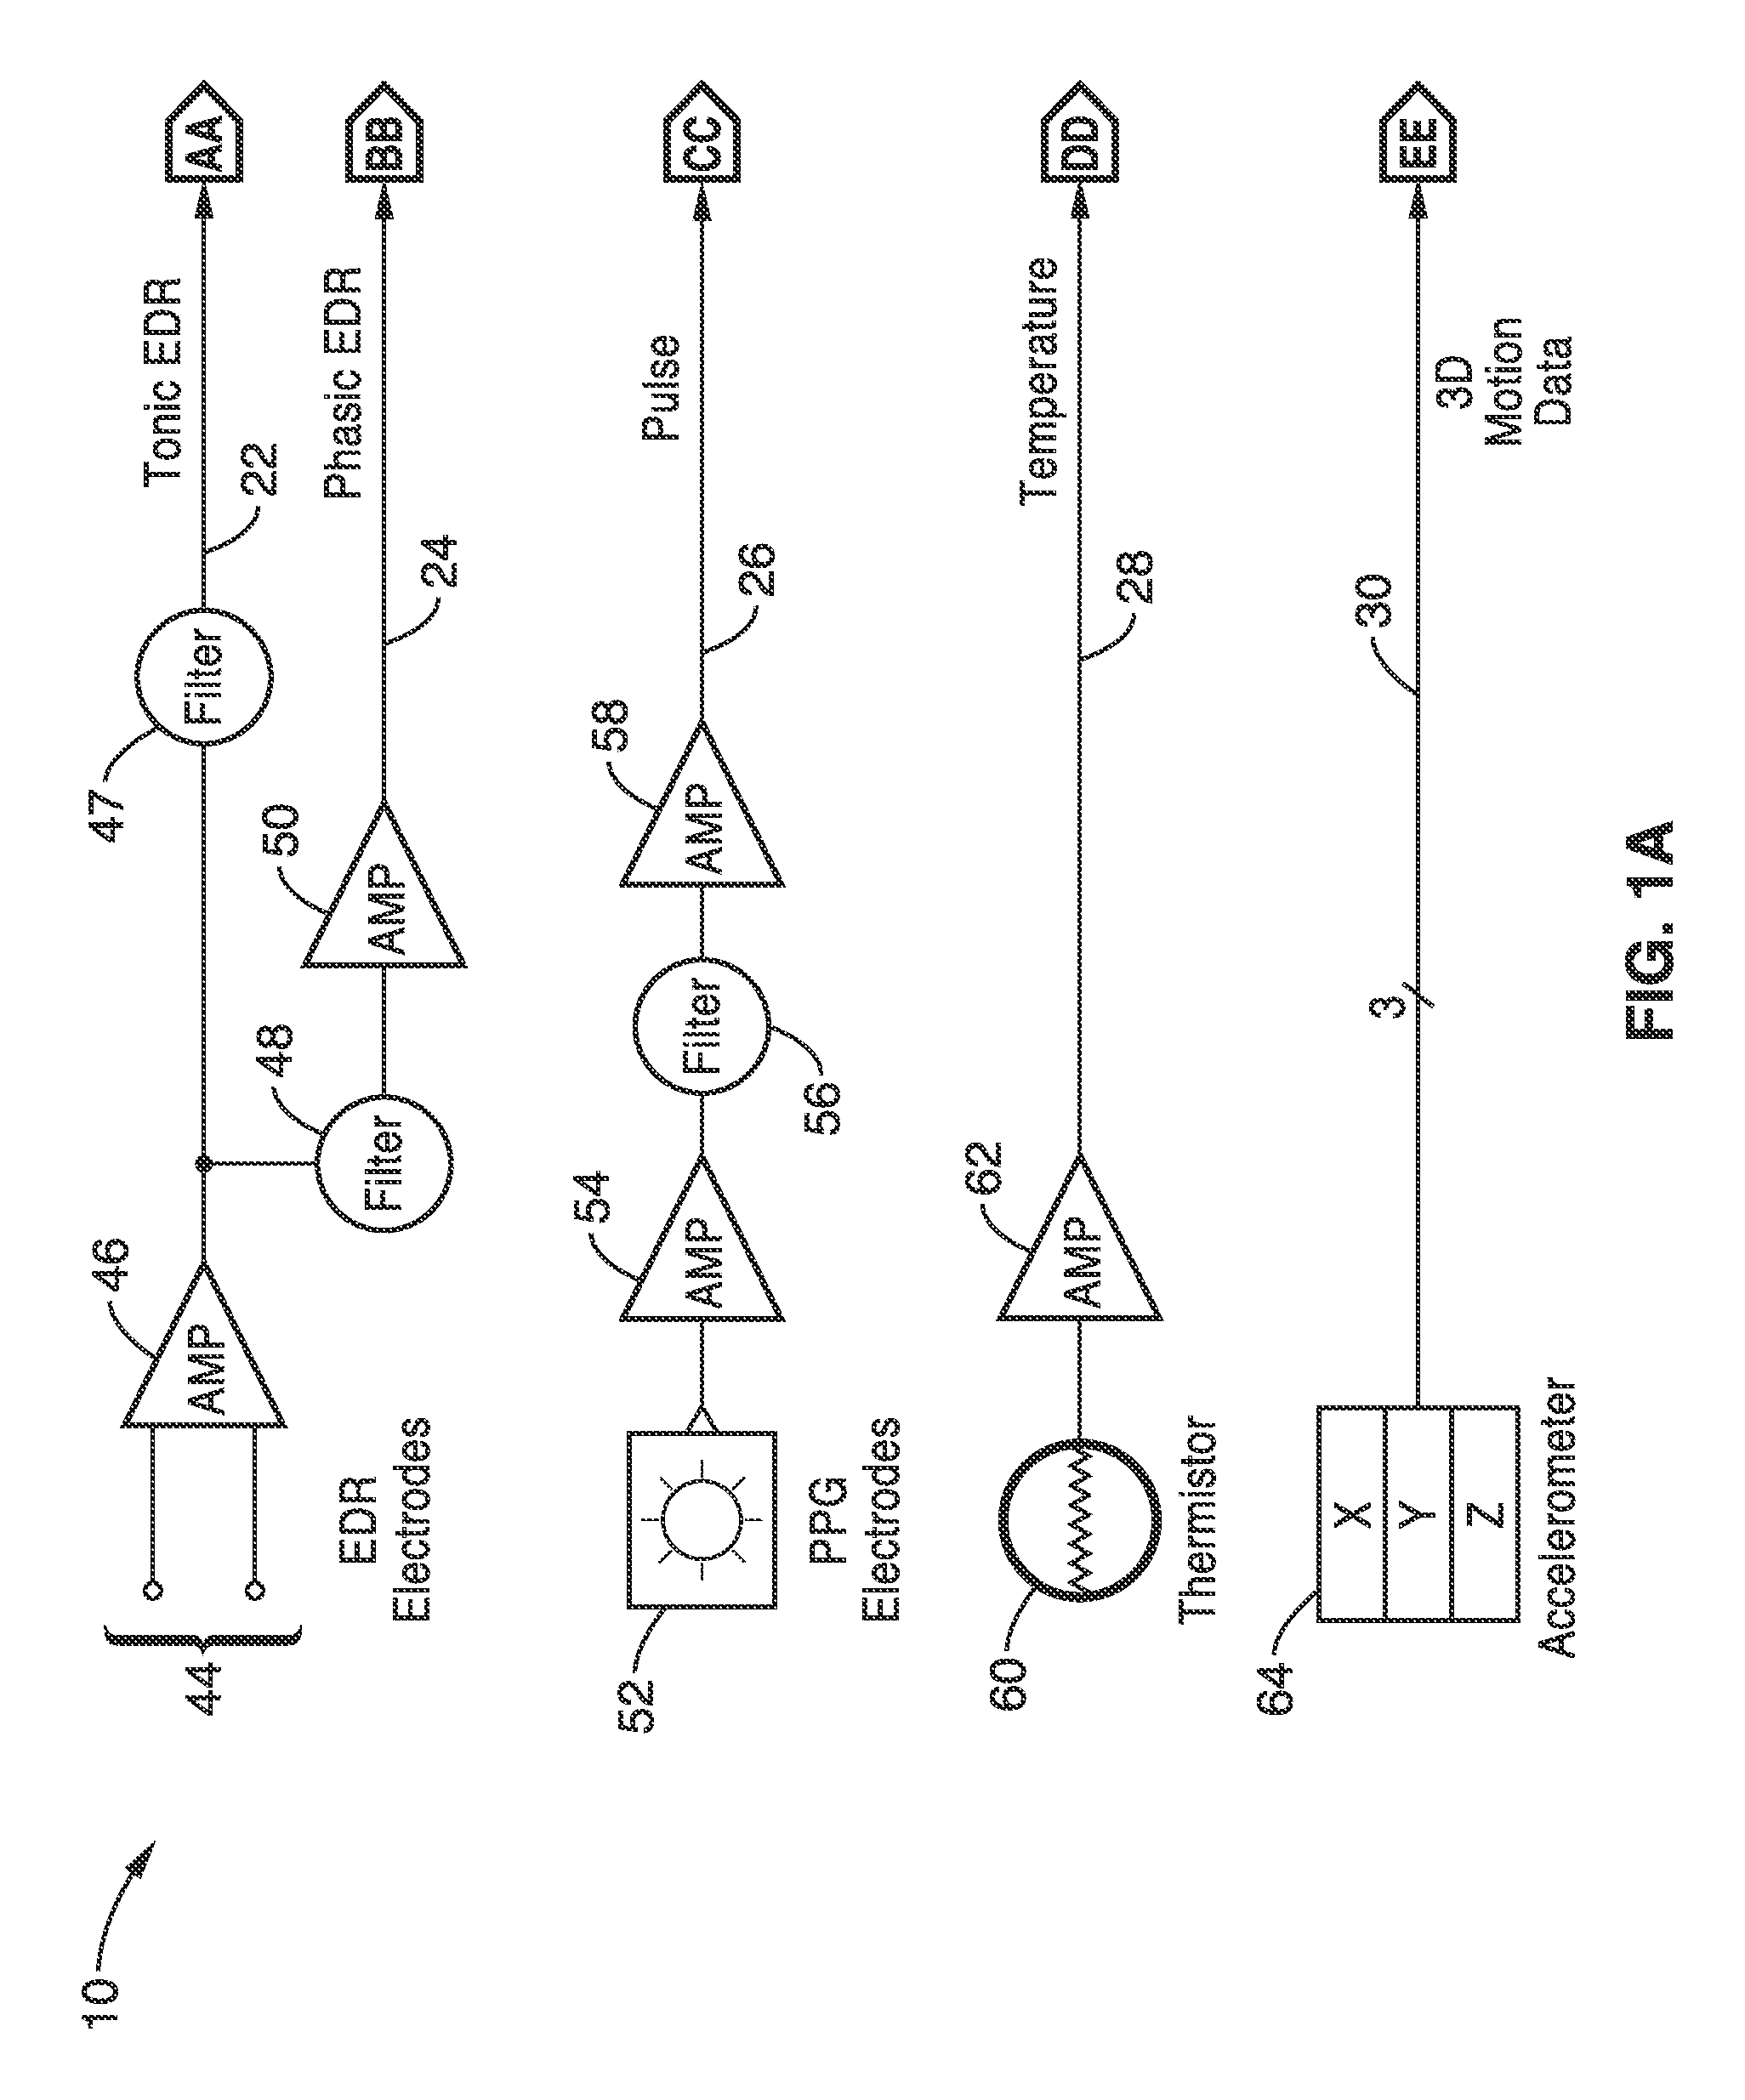 Biometric sensing and processing apparatus for mobile gaming, education, and wellness applications